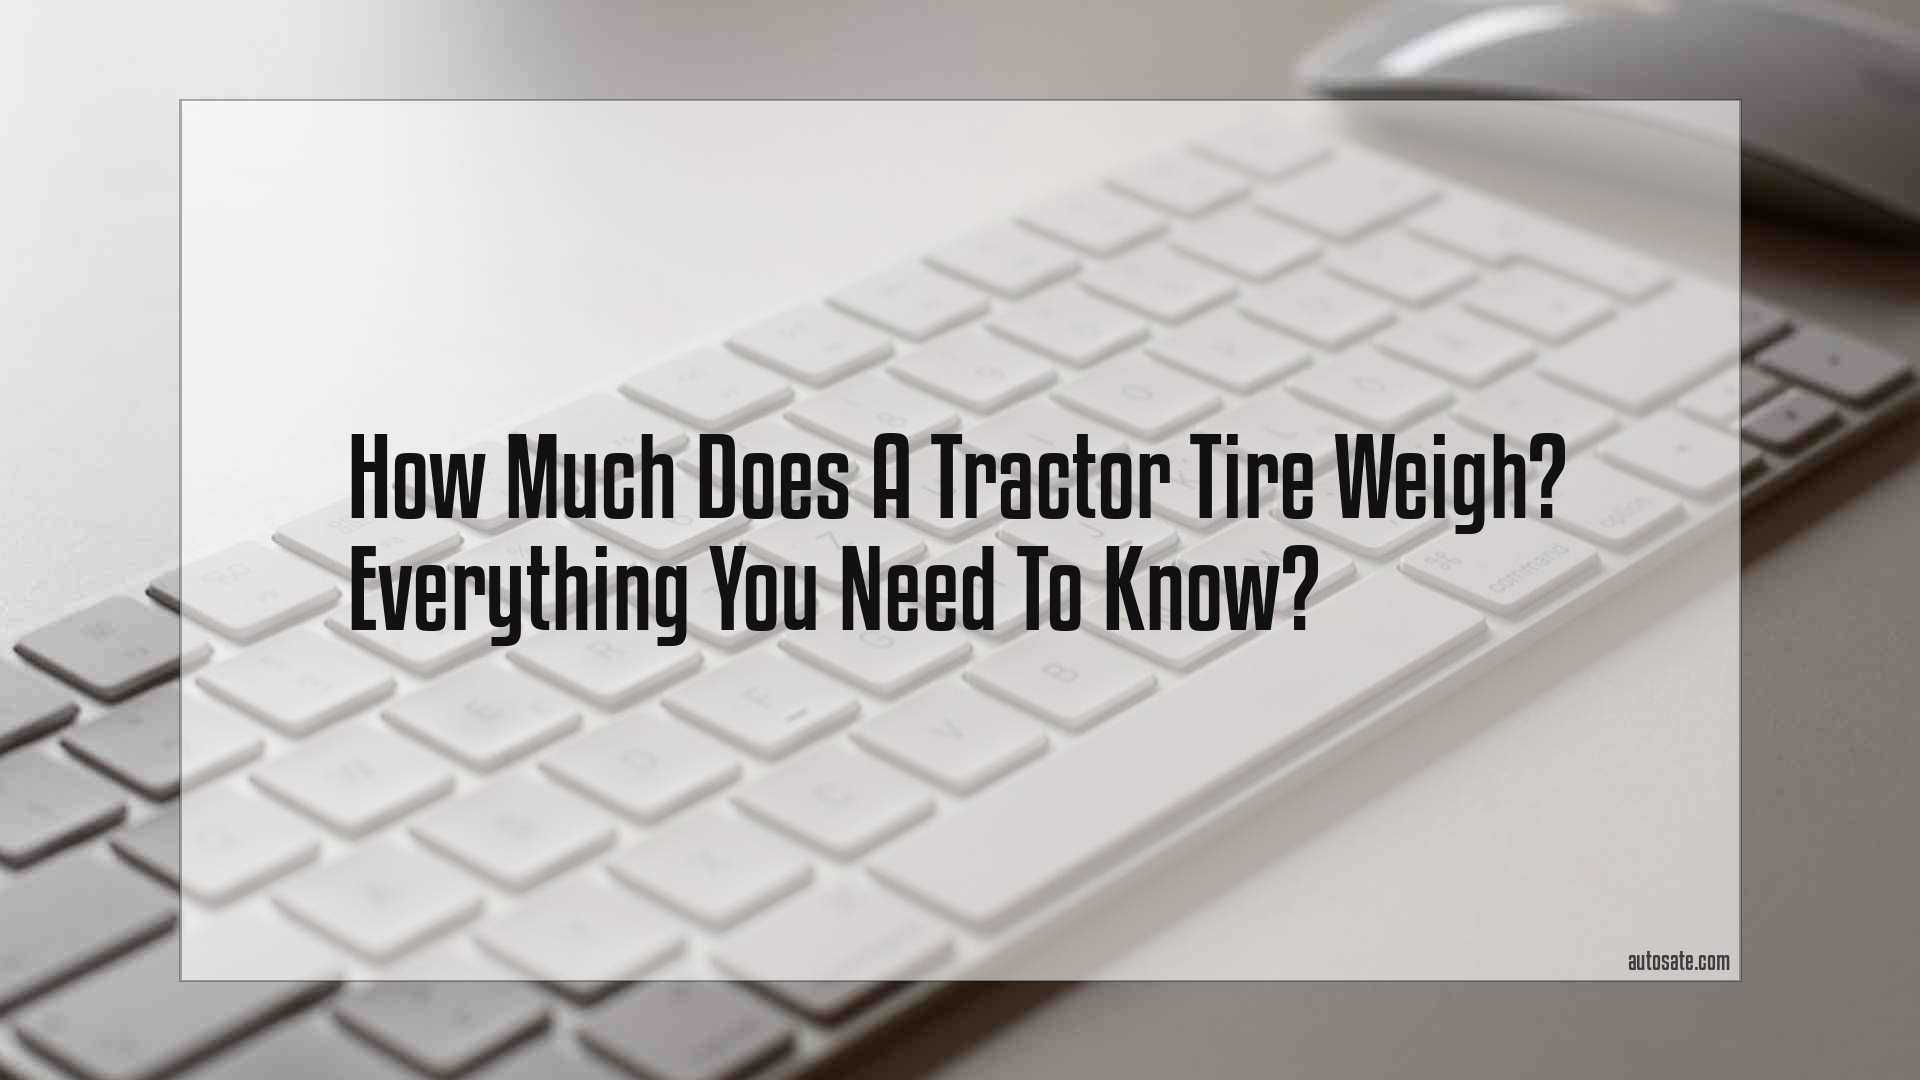 How Much Does A Tractor Tire Weigh? Everything You Need To Know